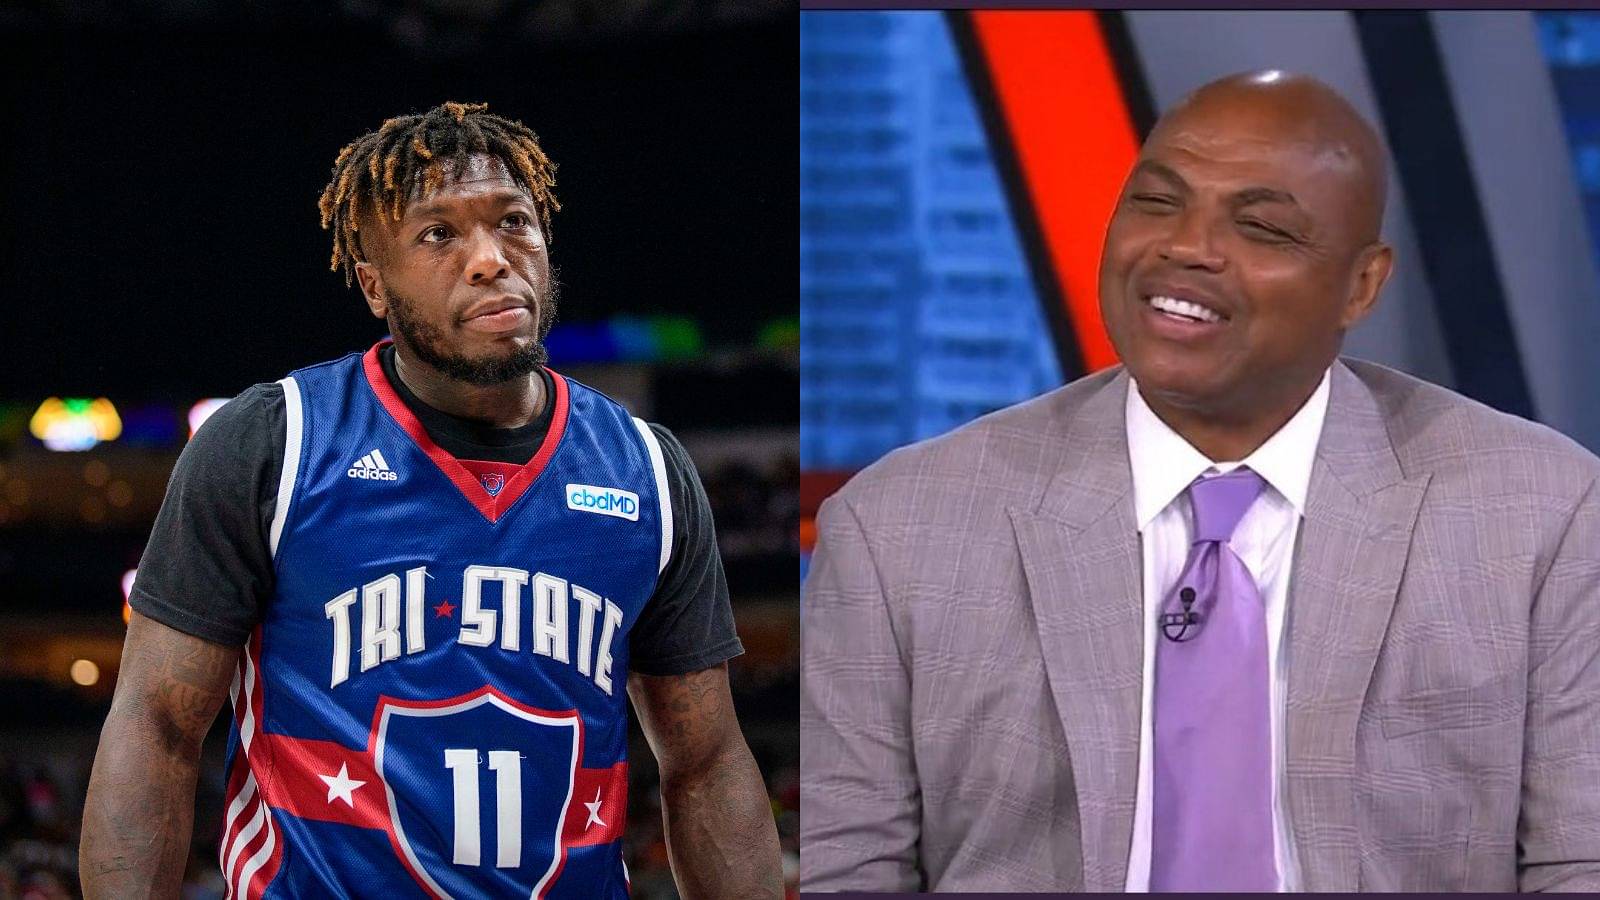 “I Would’ve Dunked You’re A** Charles Barkley”: When a 5ft 9’ Nate Robinson Shut 6ft 6’ Chuck Down For Mocking His Size